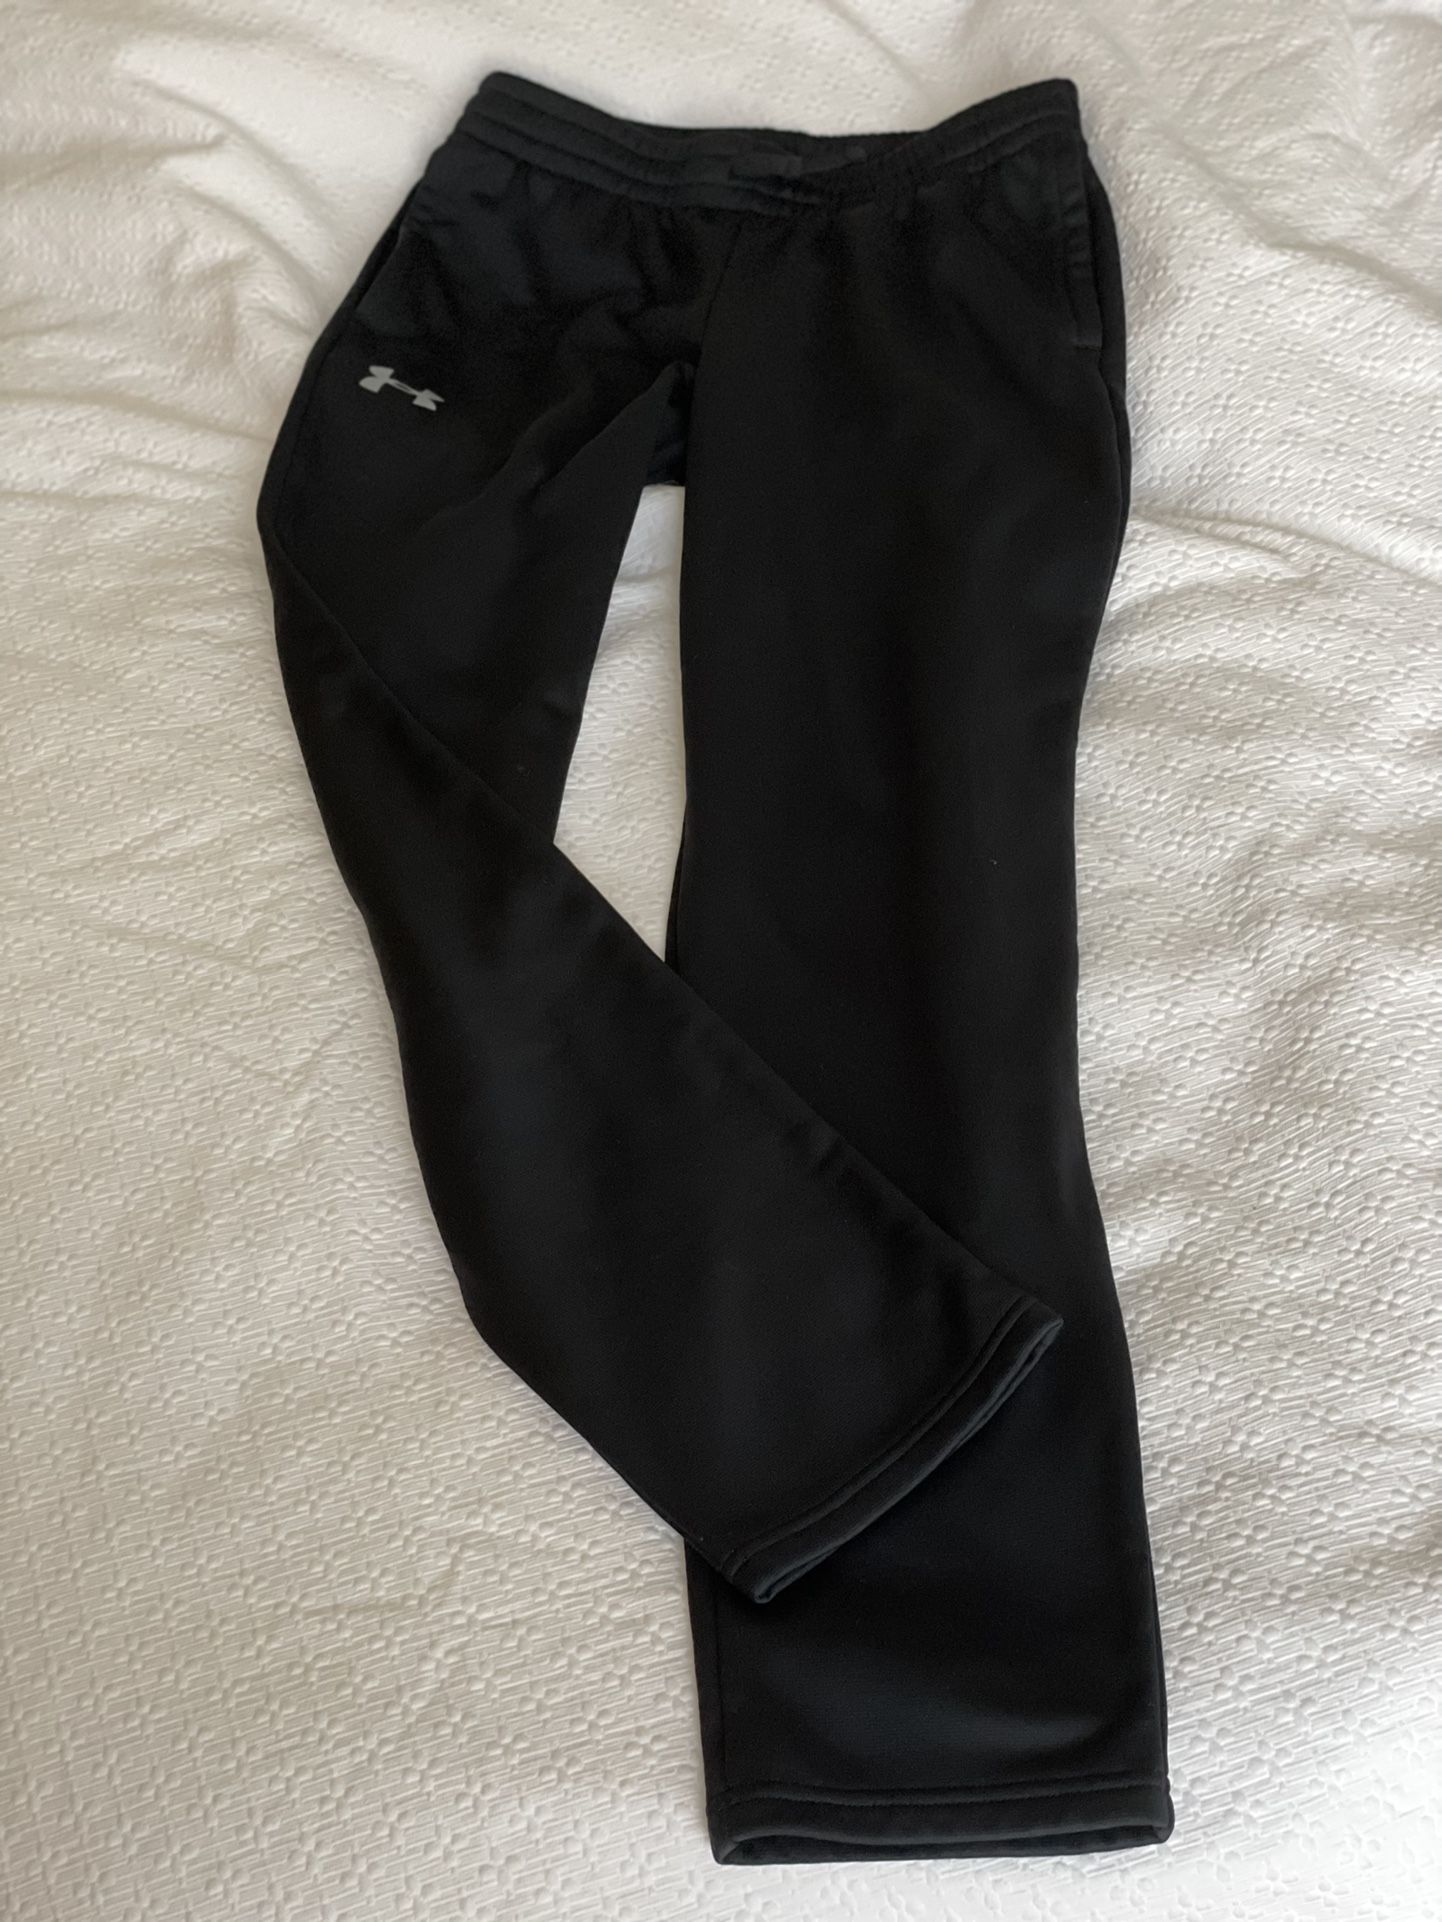 Under Armour Youth Sweatpants Size XYLG